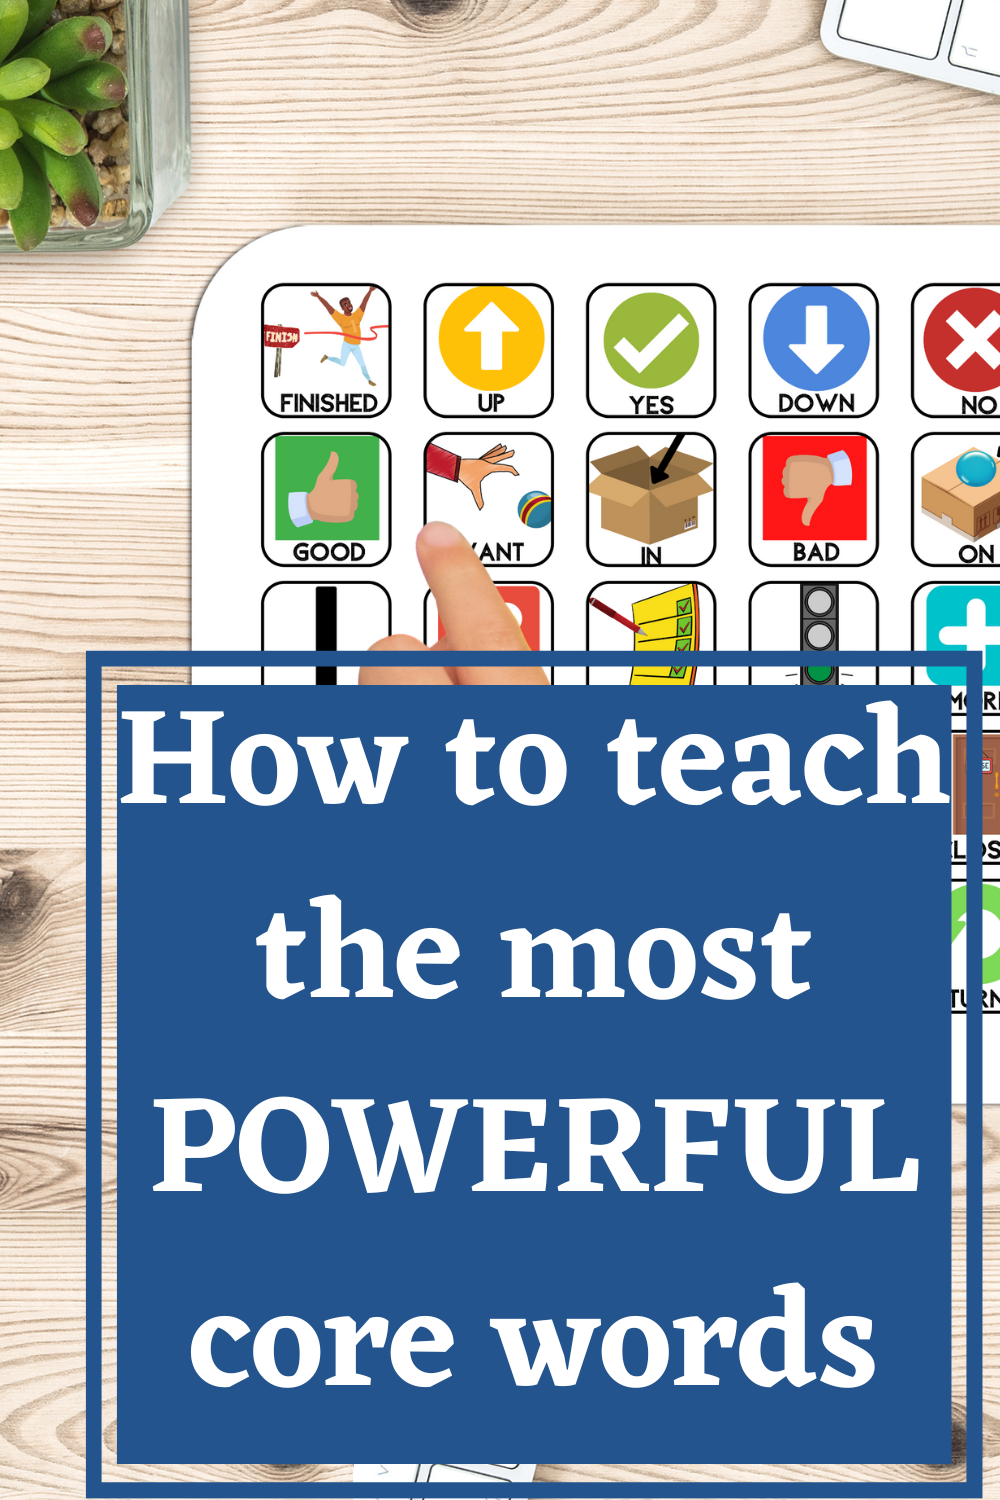 How to Teach the Most Powerful Core Words